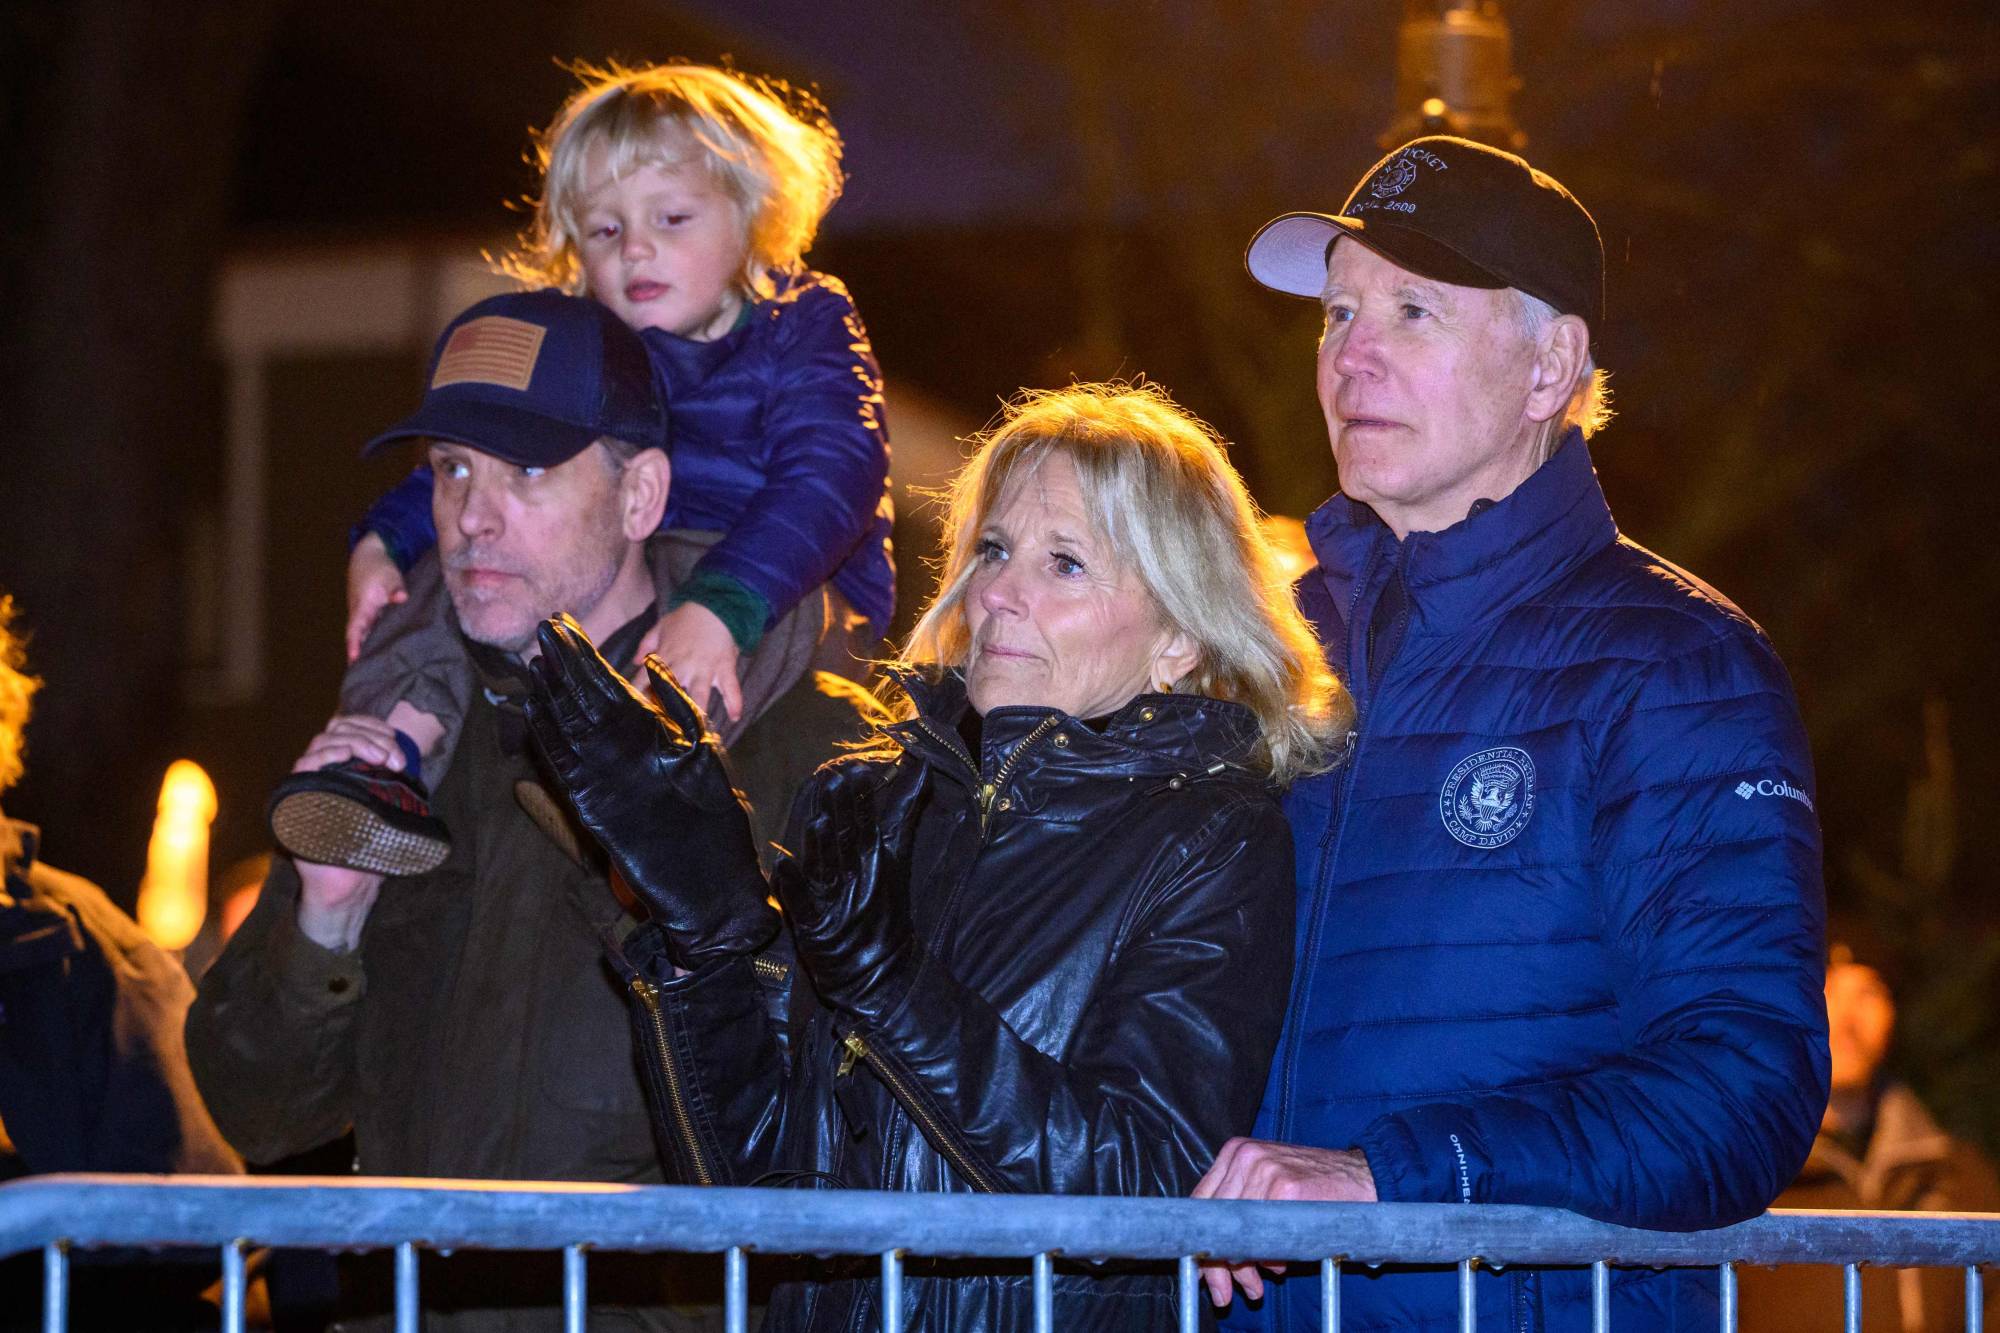 U.S. President Joe Biden and first lady Jill Biden watch a Christmas tree-lighting ceremony with the president's son Hunter Biden and his grandson Beau Jr. during their family's Thanksgiving holiday in Nantucket, Massachusetts, on Nov. 25. | AFP-JIJI